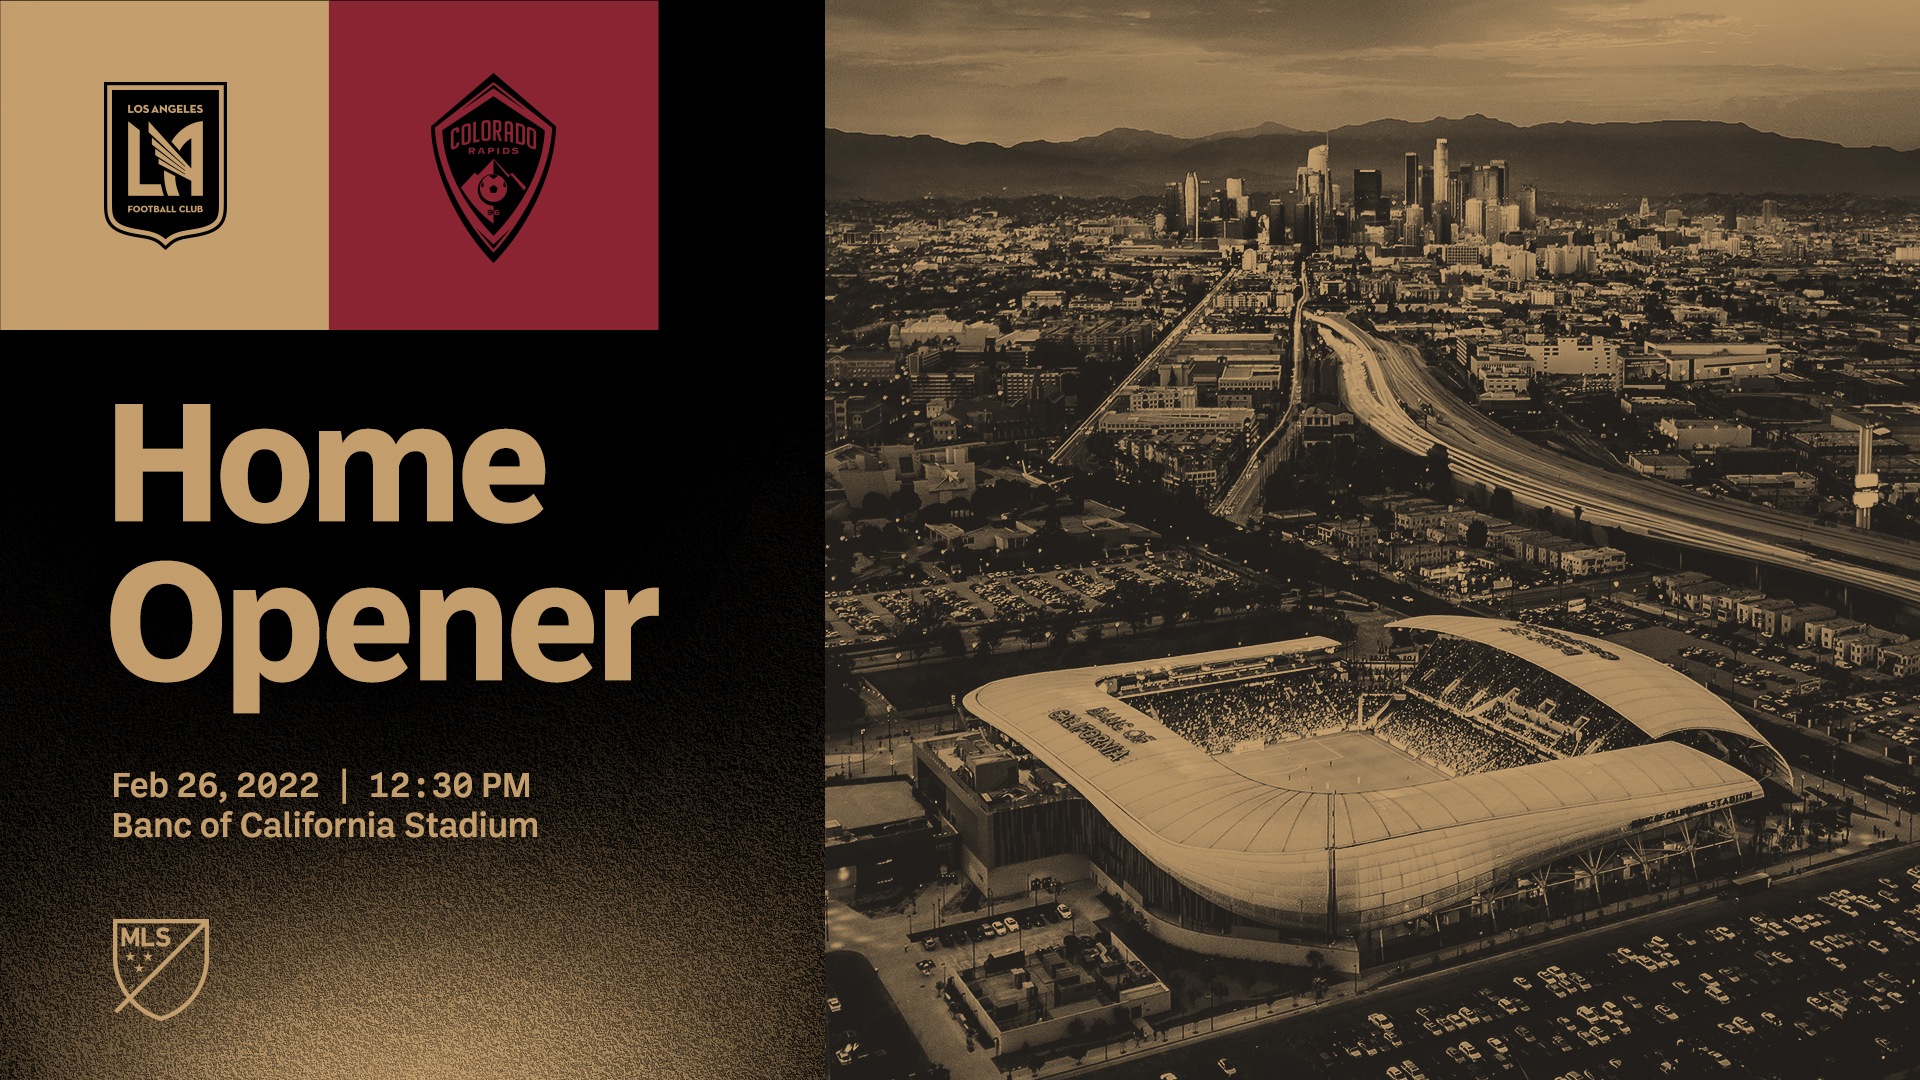 Los Angeles Fc Schedule 2022 Mls Announces Home Openers For 2022 Season | Los Angeles Football Club